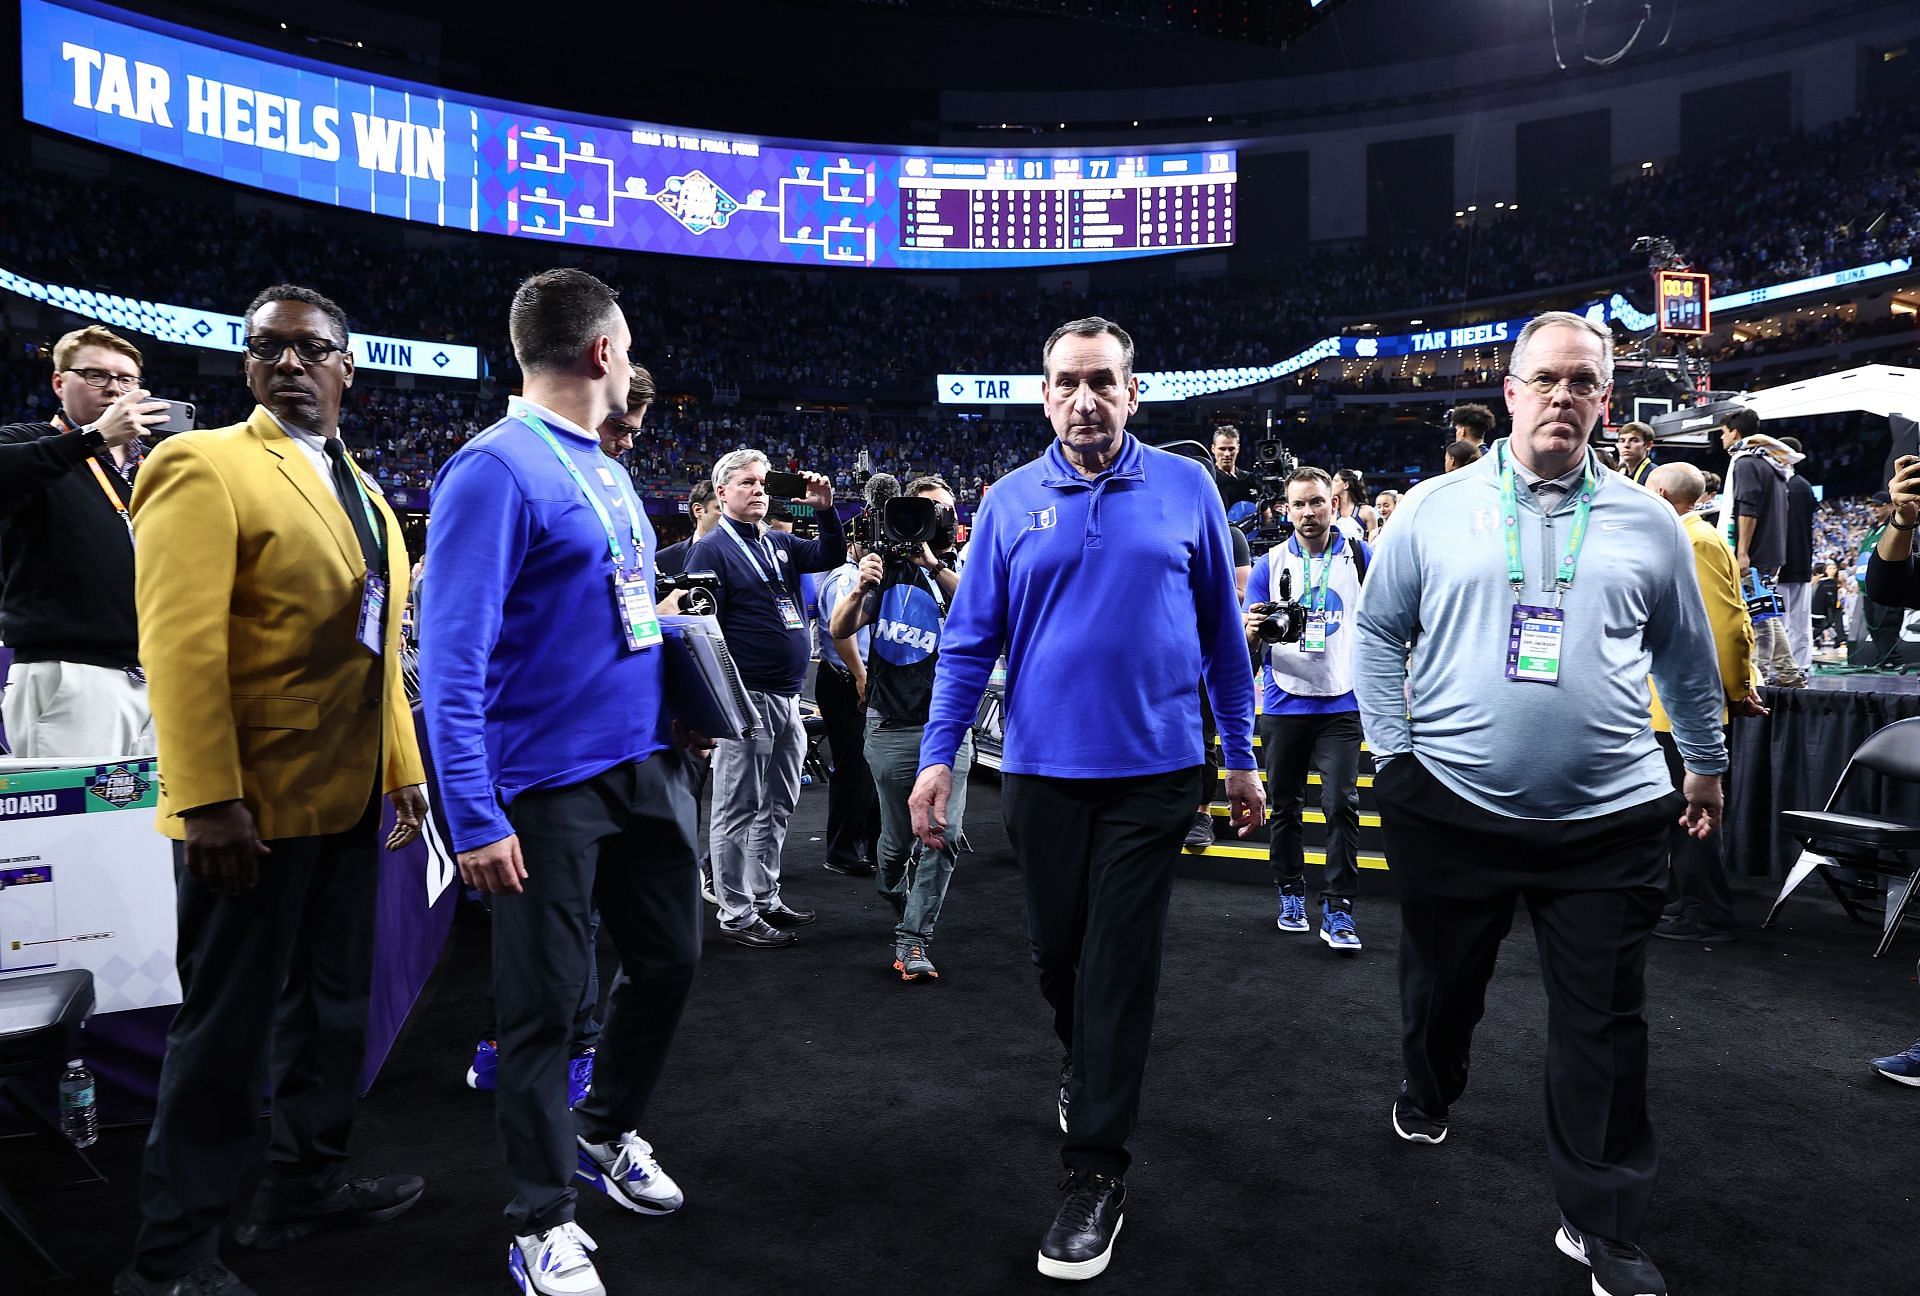 Coach Mike Krzyzewski says he is done with coaching after the Final Four loss.